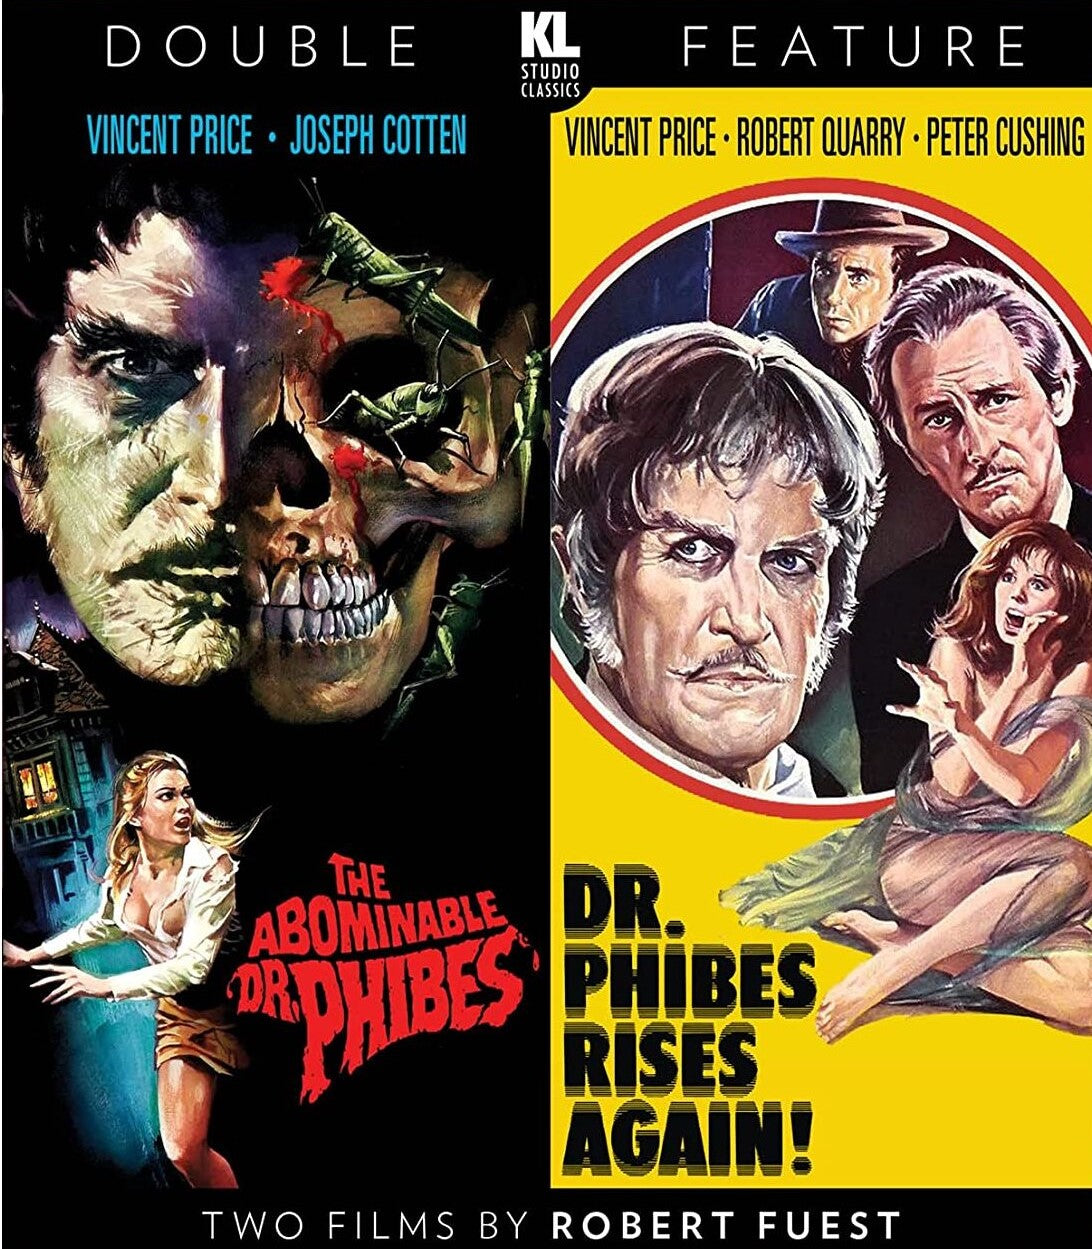 THE ABOMINABLE DR PHIBES / DR PHIBES RISES AGAIN BLU-RAY